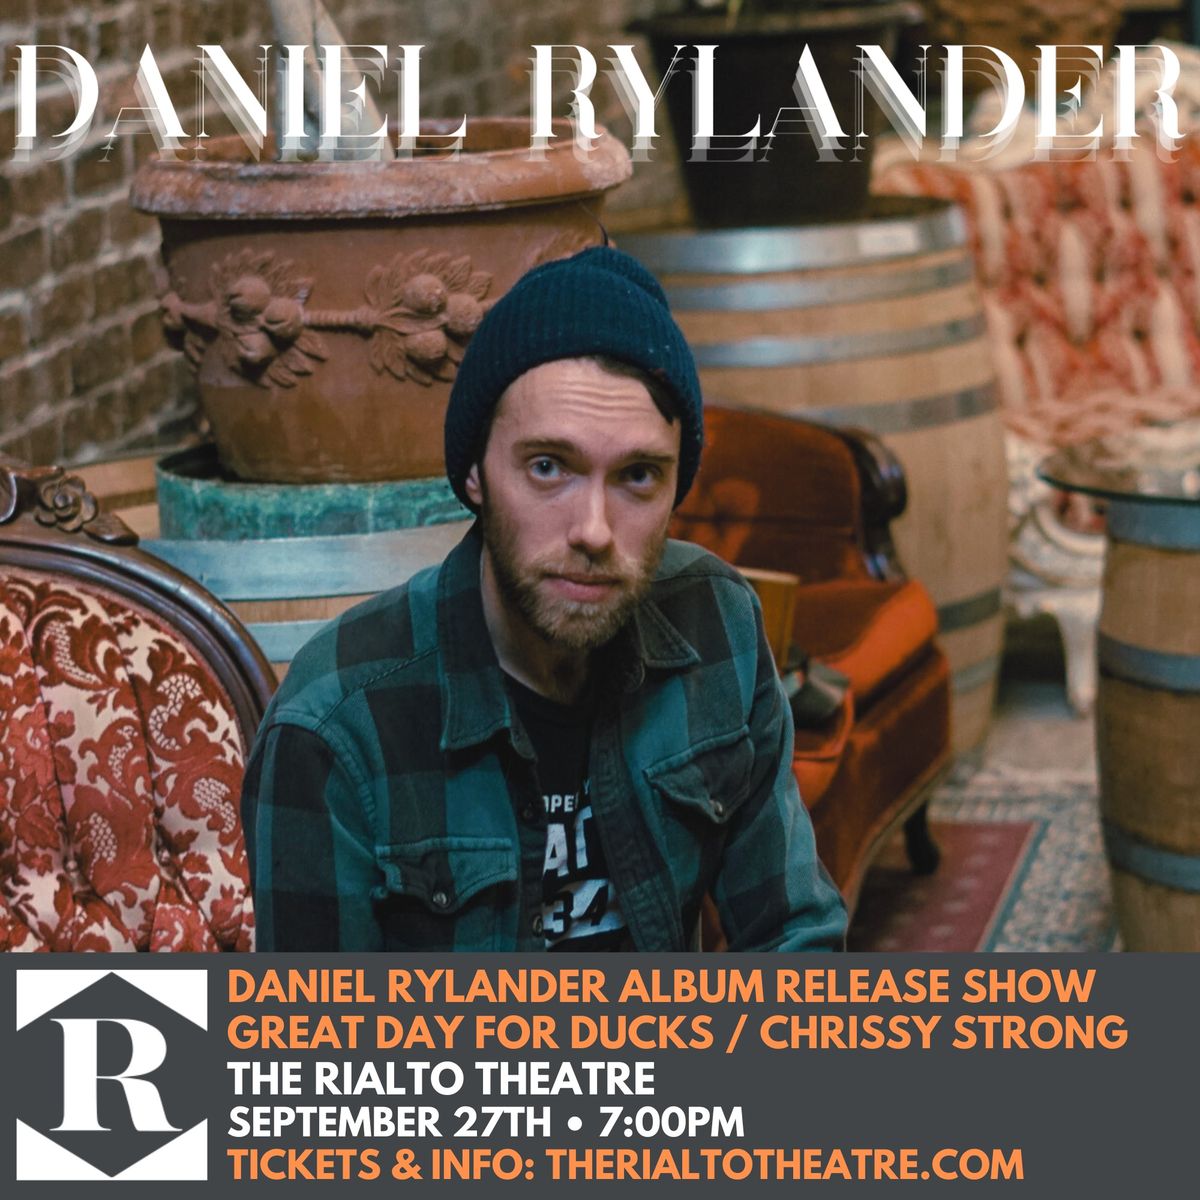 DANIEL RYLANDER ALBUM RELEASE SHOW WITH GREAT DAY FOR DUCKS \/ CHRISSY STRONG